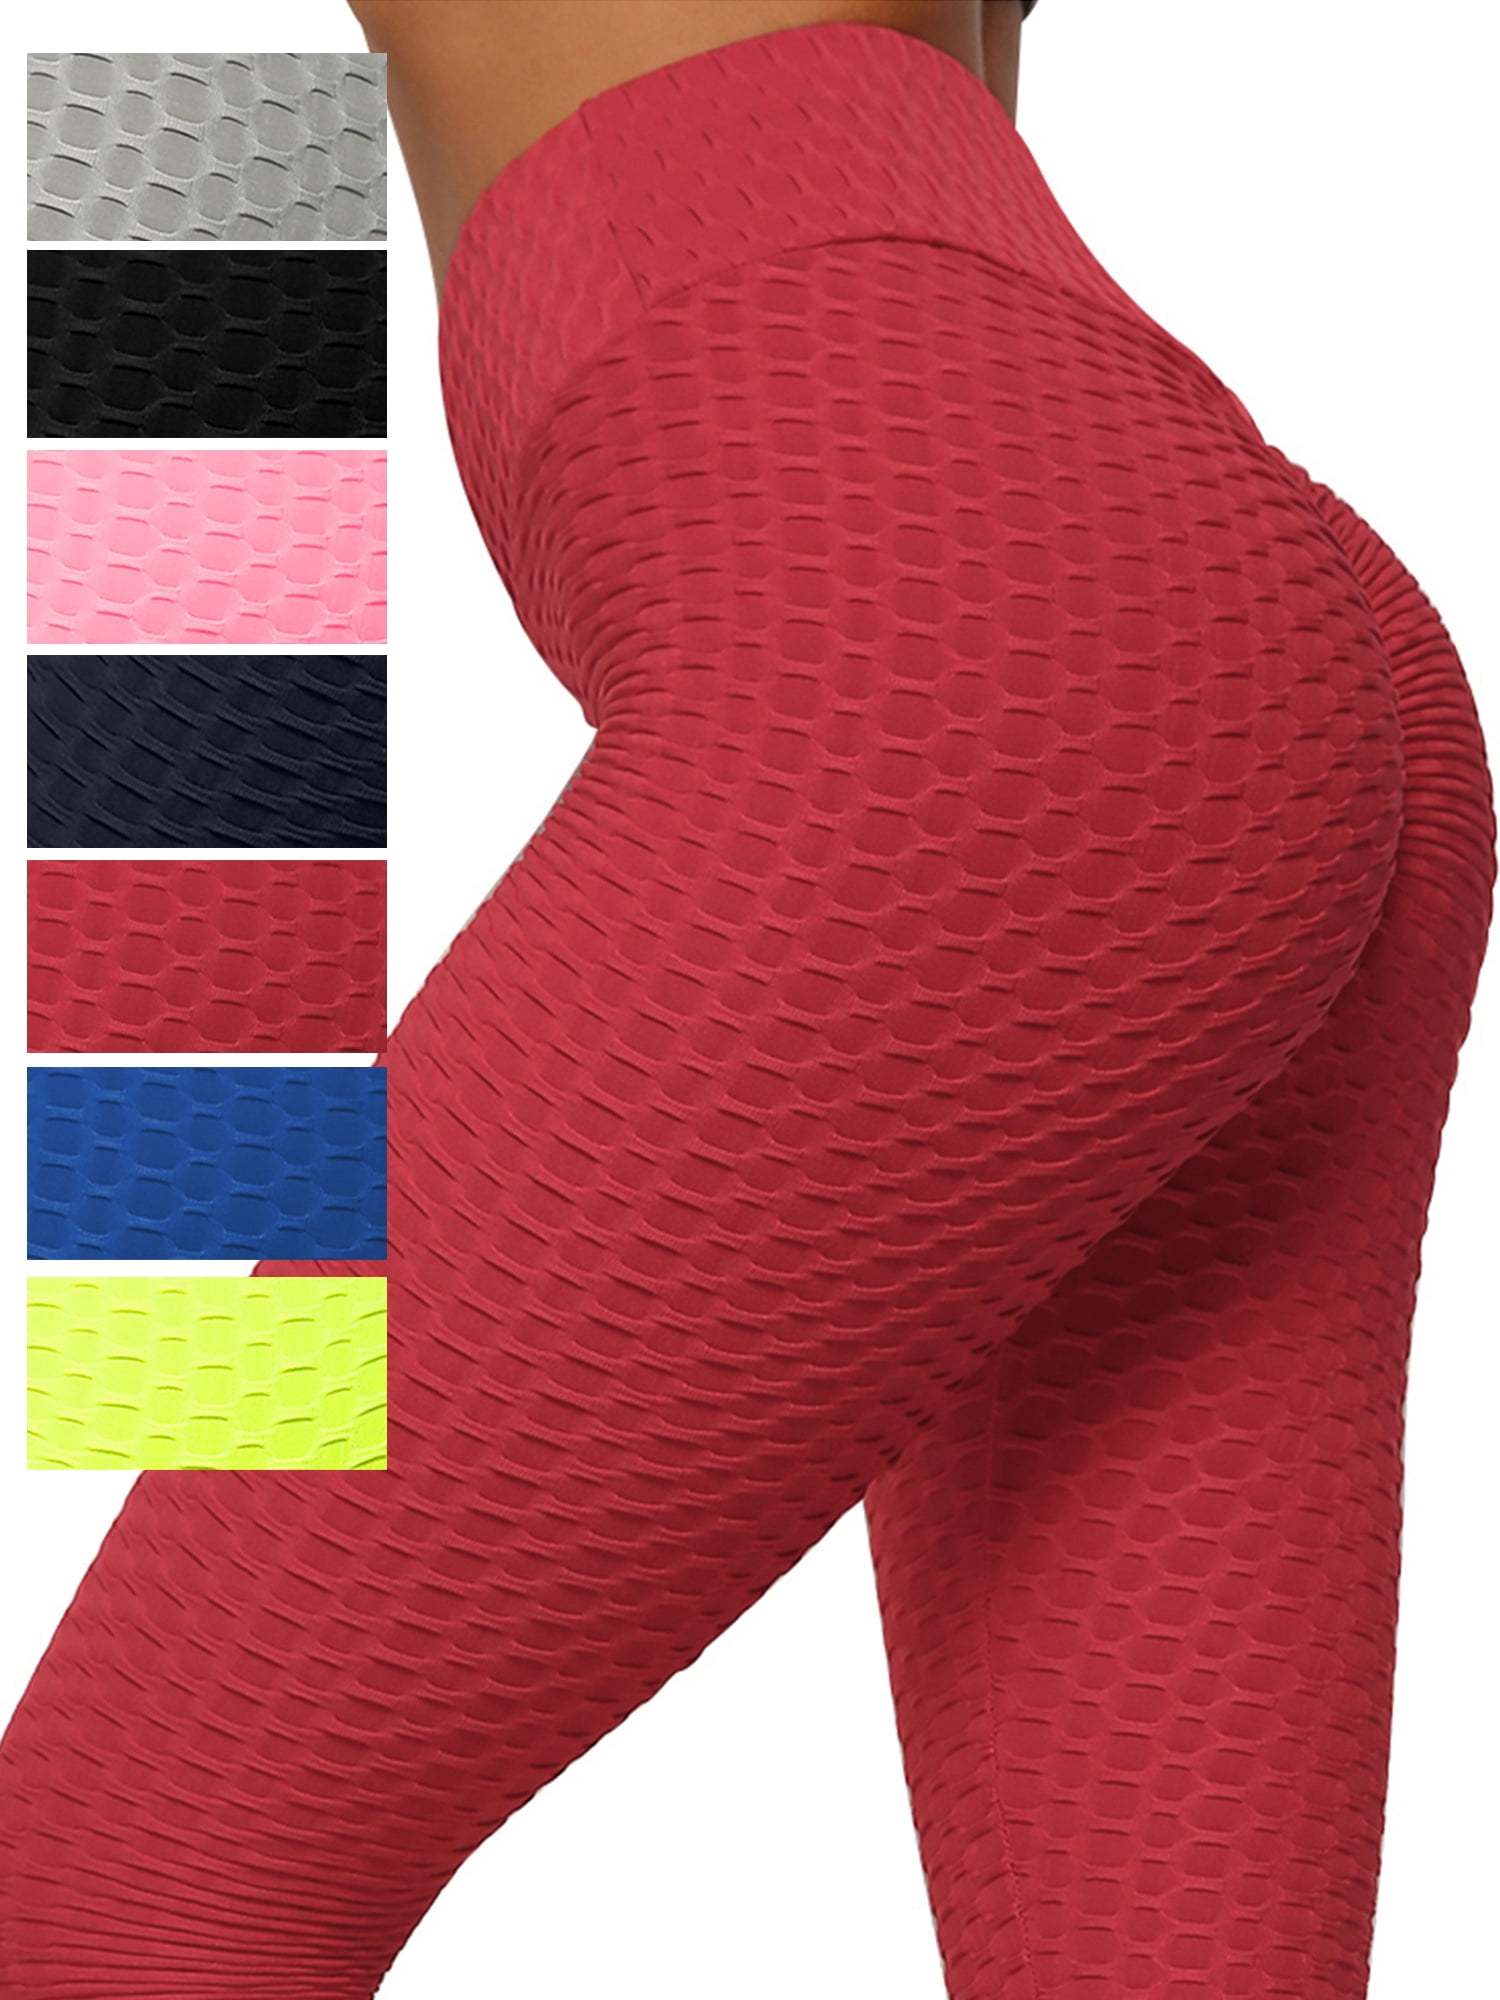 DODOING Scrunch Butt Yoga Pants High Waisted Textured Butt Lift Leggings  for Women Booty Lifting Tights, Navy Blue/ Black/ Blue/ Grey/ Red/ Yellow/  Pink 